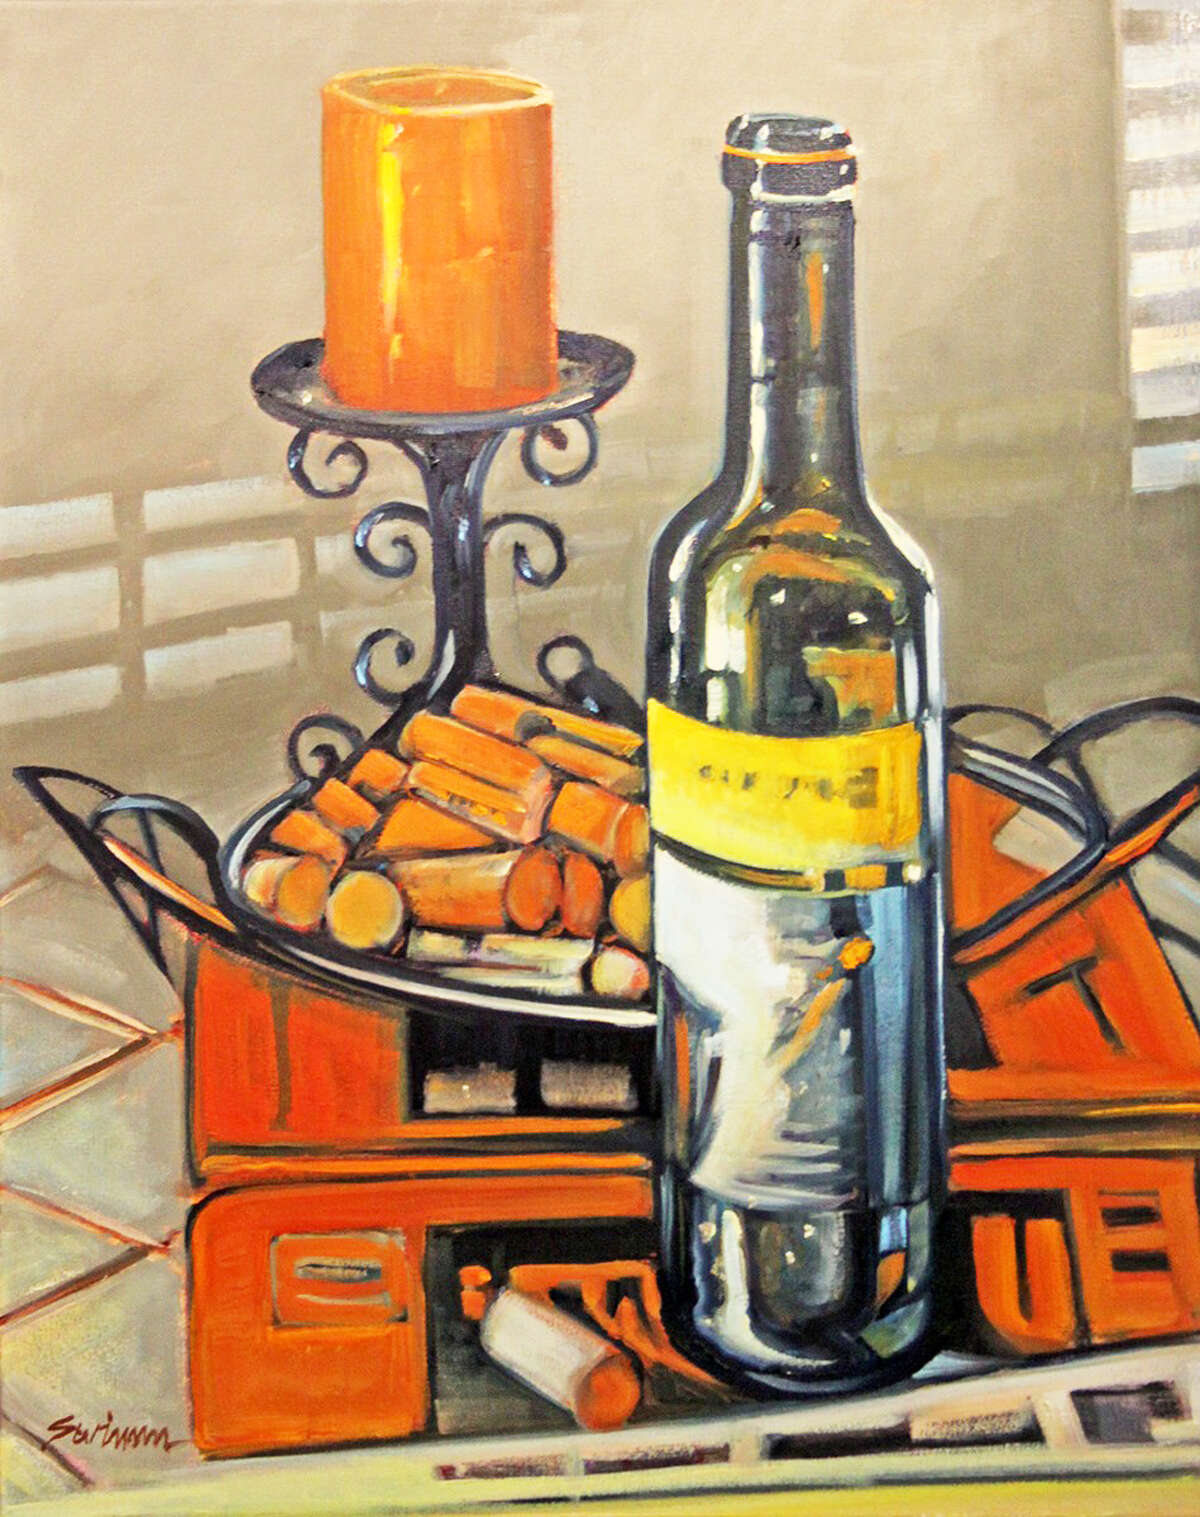 Spectrum Art Gallery of Centerbrook will present "The Unique Still Life," new artwork by established and emerging artists from throughout Connecticut, the tri-state area and New England. Shown here is "Still Life with Shiraz," by Tom Swimm.